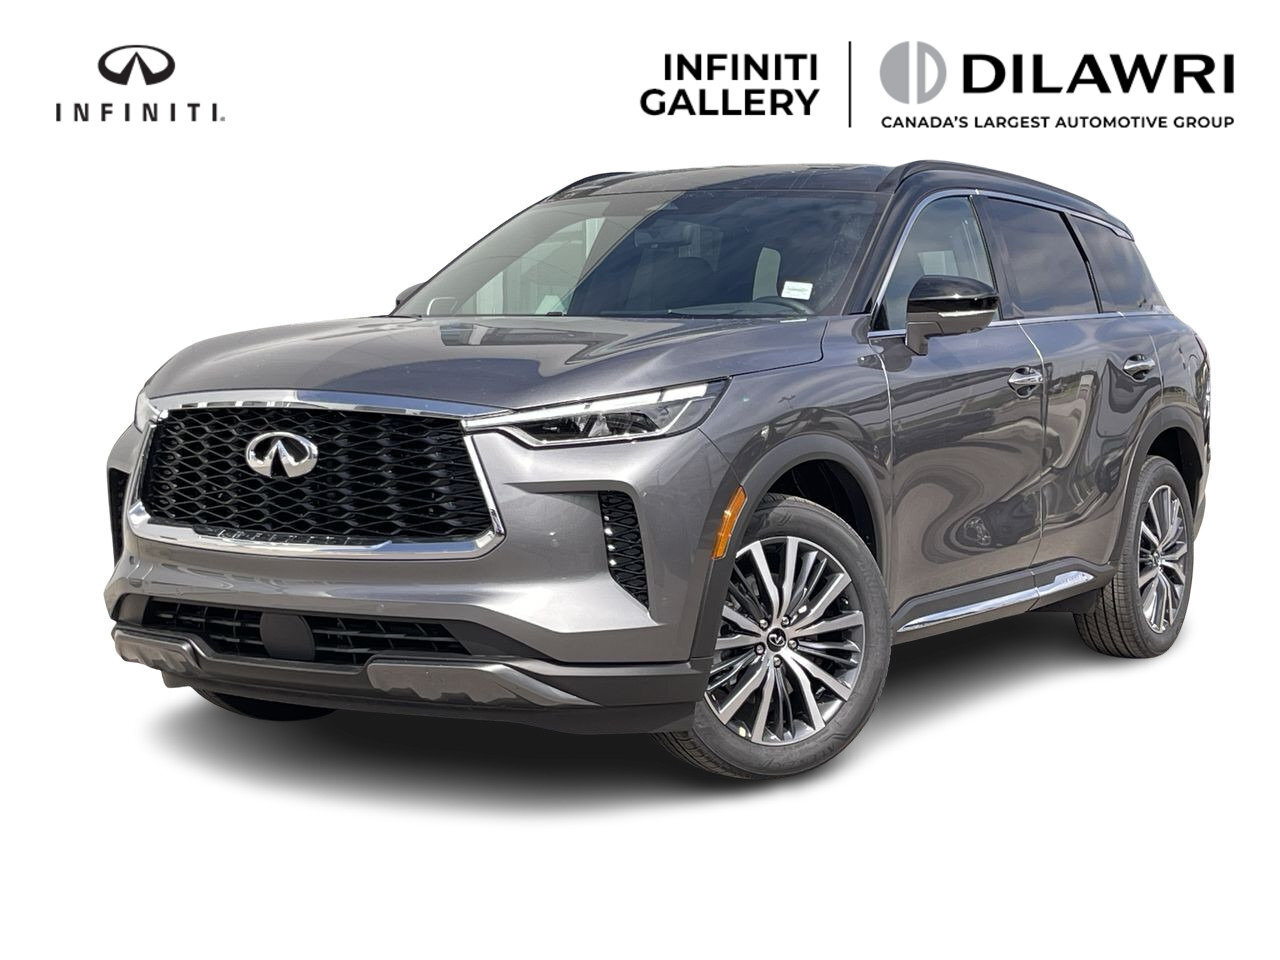 2023 Infiniti QX60 Autograph Model Year Clearance - Save Thousands!